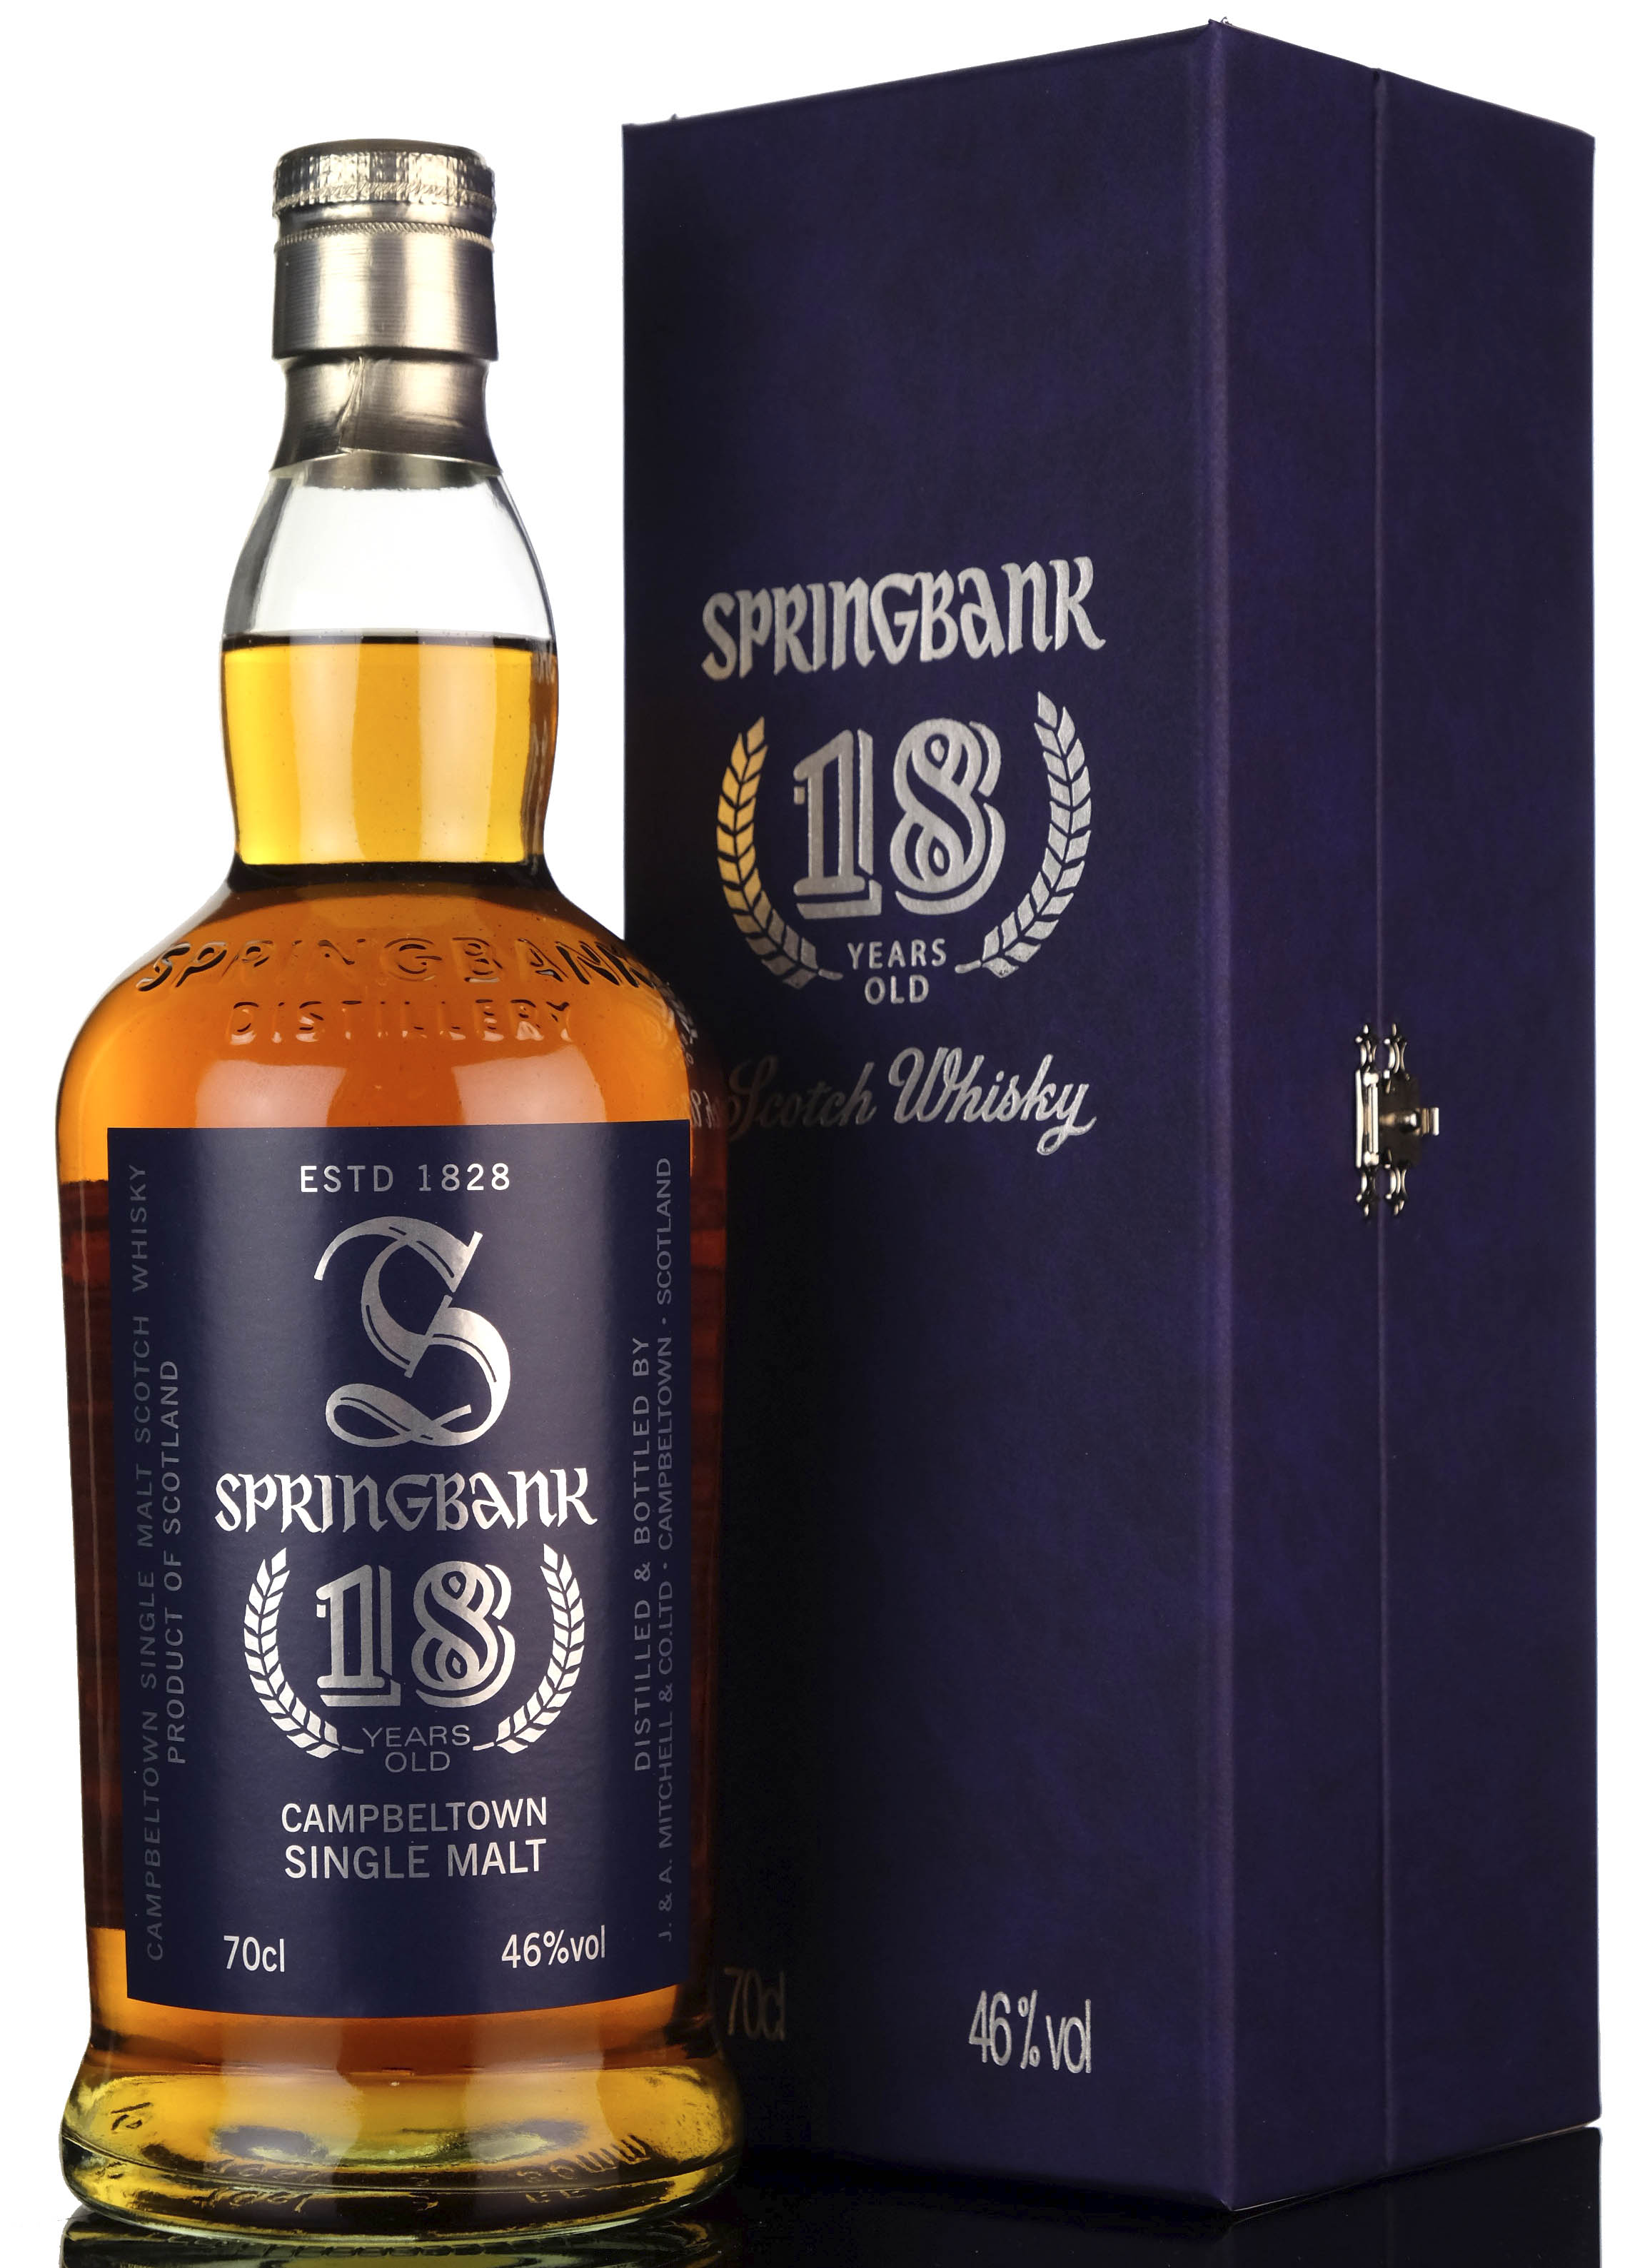 Springbank 18 Year Old - Late 2000s